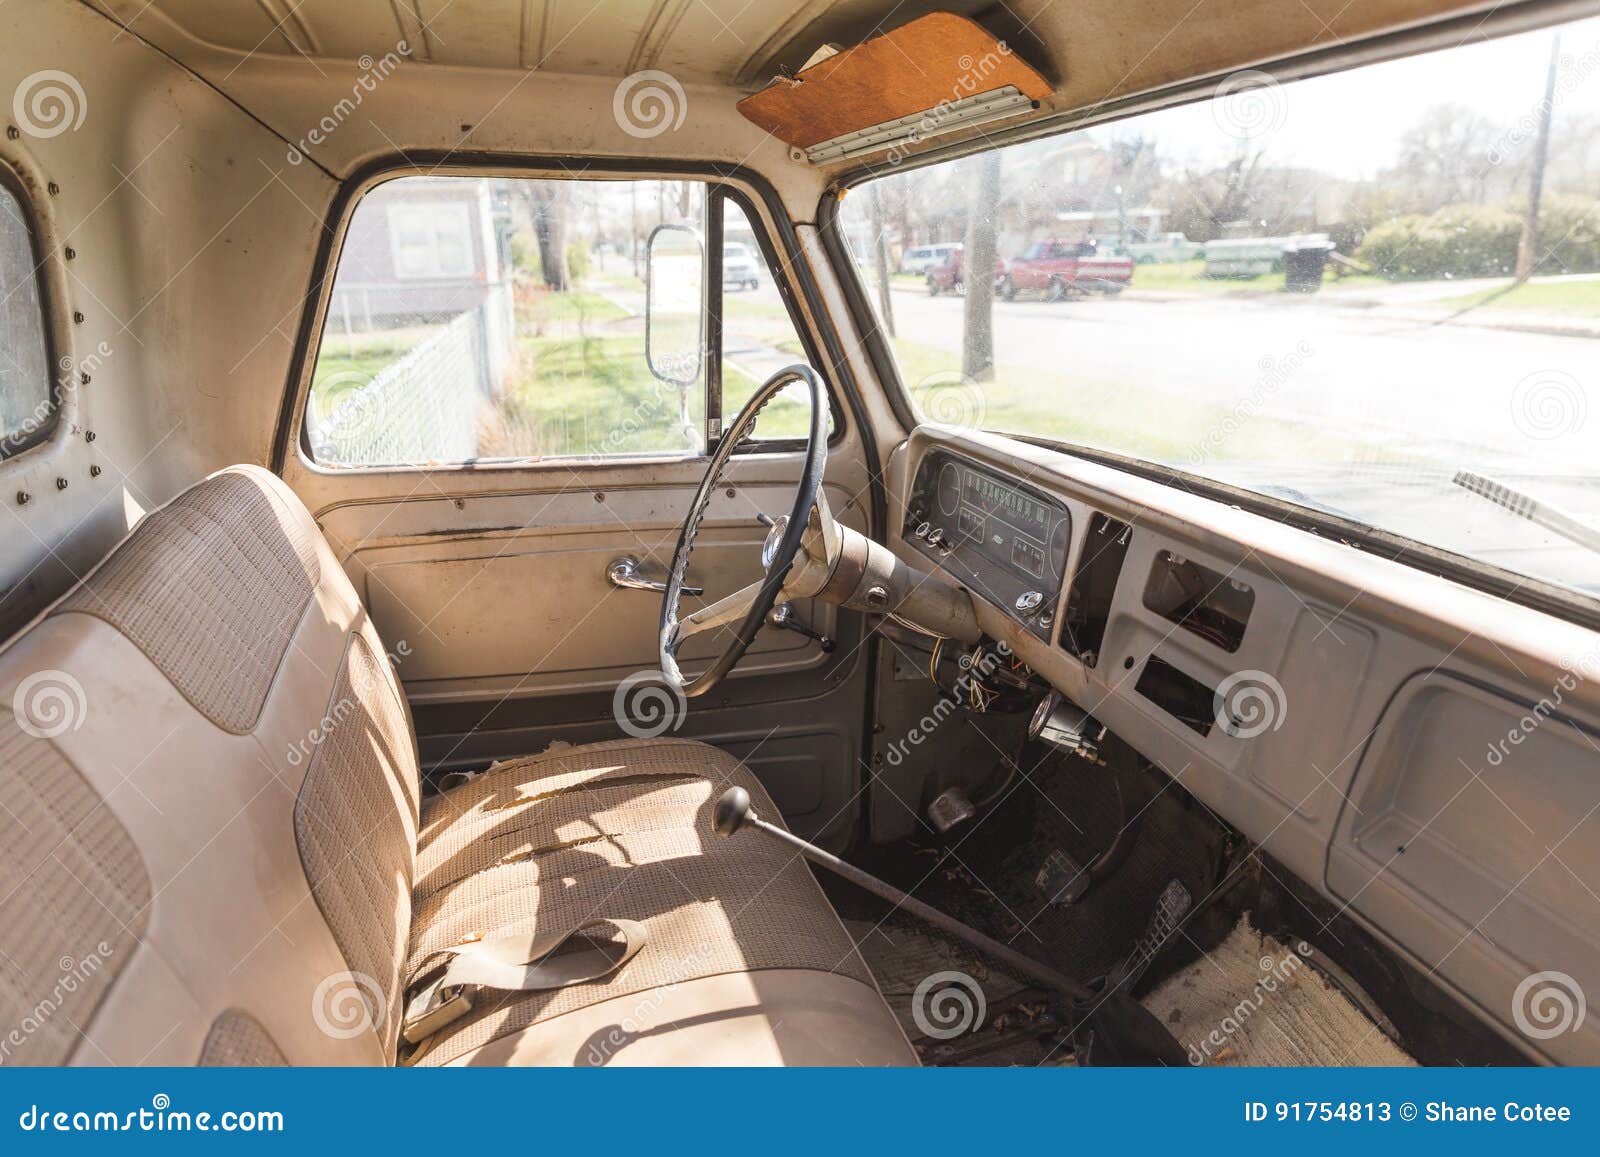 Interior Of Classic Vintage Pickup Truck Stock Image Image